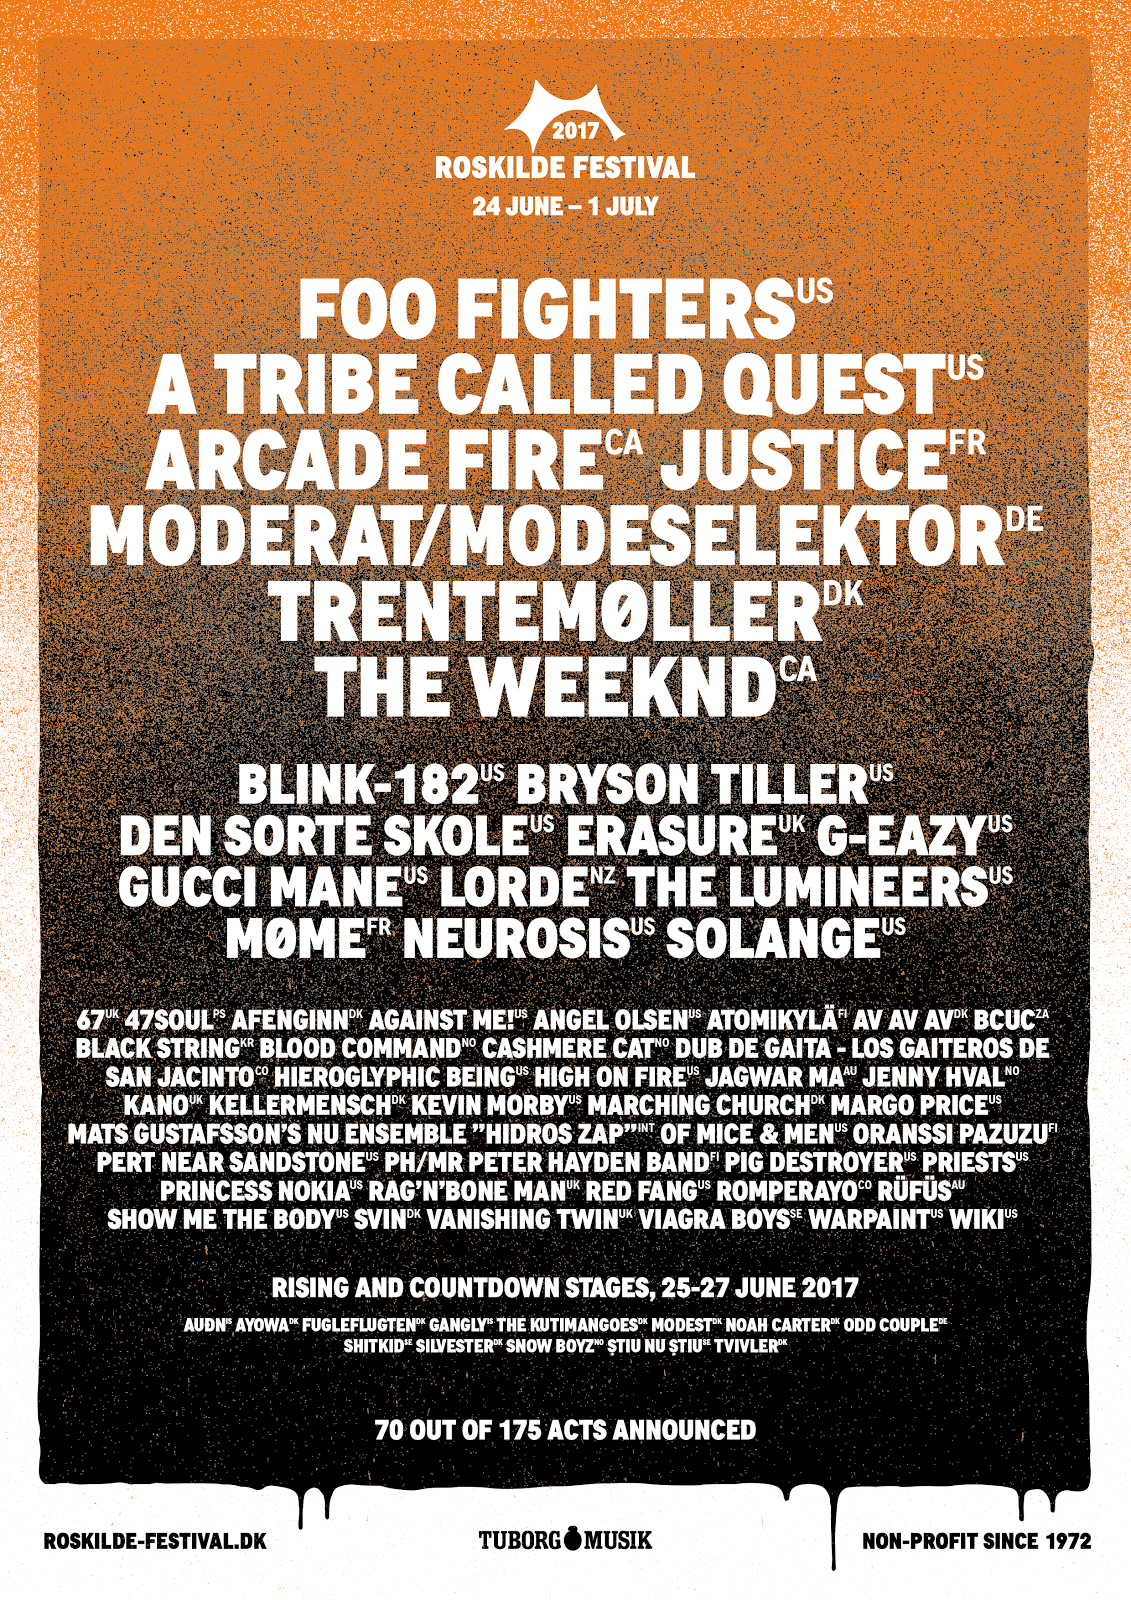 Full Roskilde Lineup Announced - The XX, Future Islands, Royal Blood, Slowdive & More